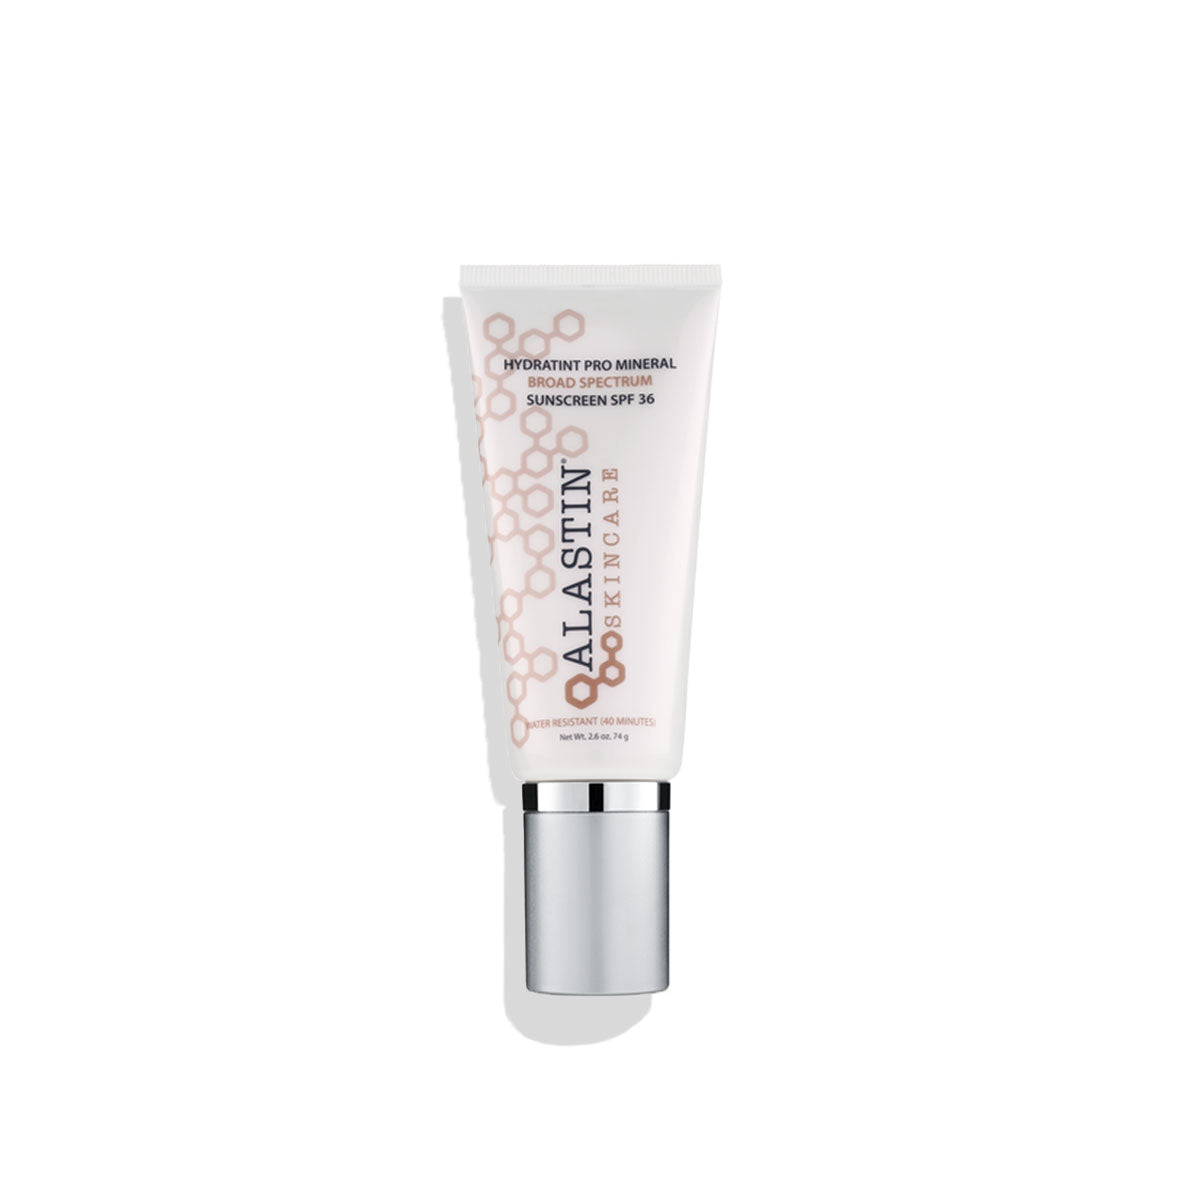 Image of Alastin HydraTint Pro Mineral Sunscreen SPF 36 in a sleek tube, emphasizing its tinted cap and protective properties, set against a neutral background sunscreen moisturizer